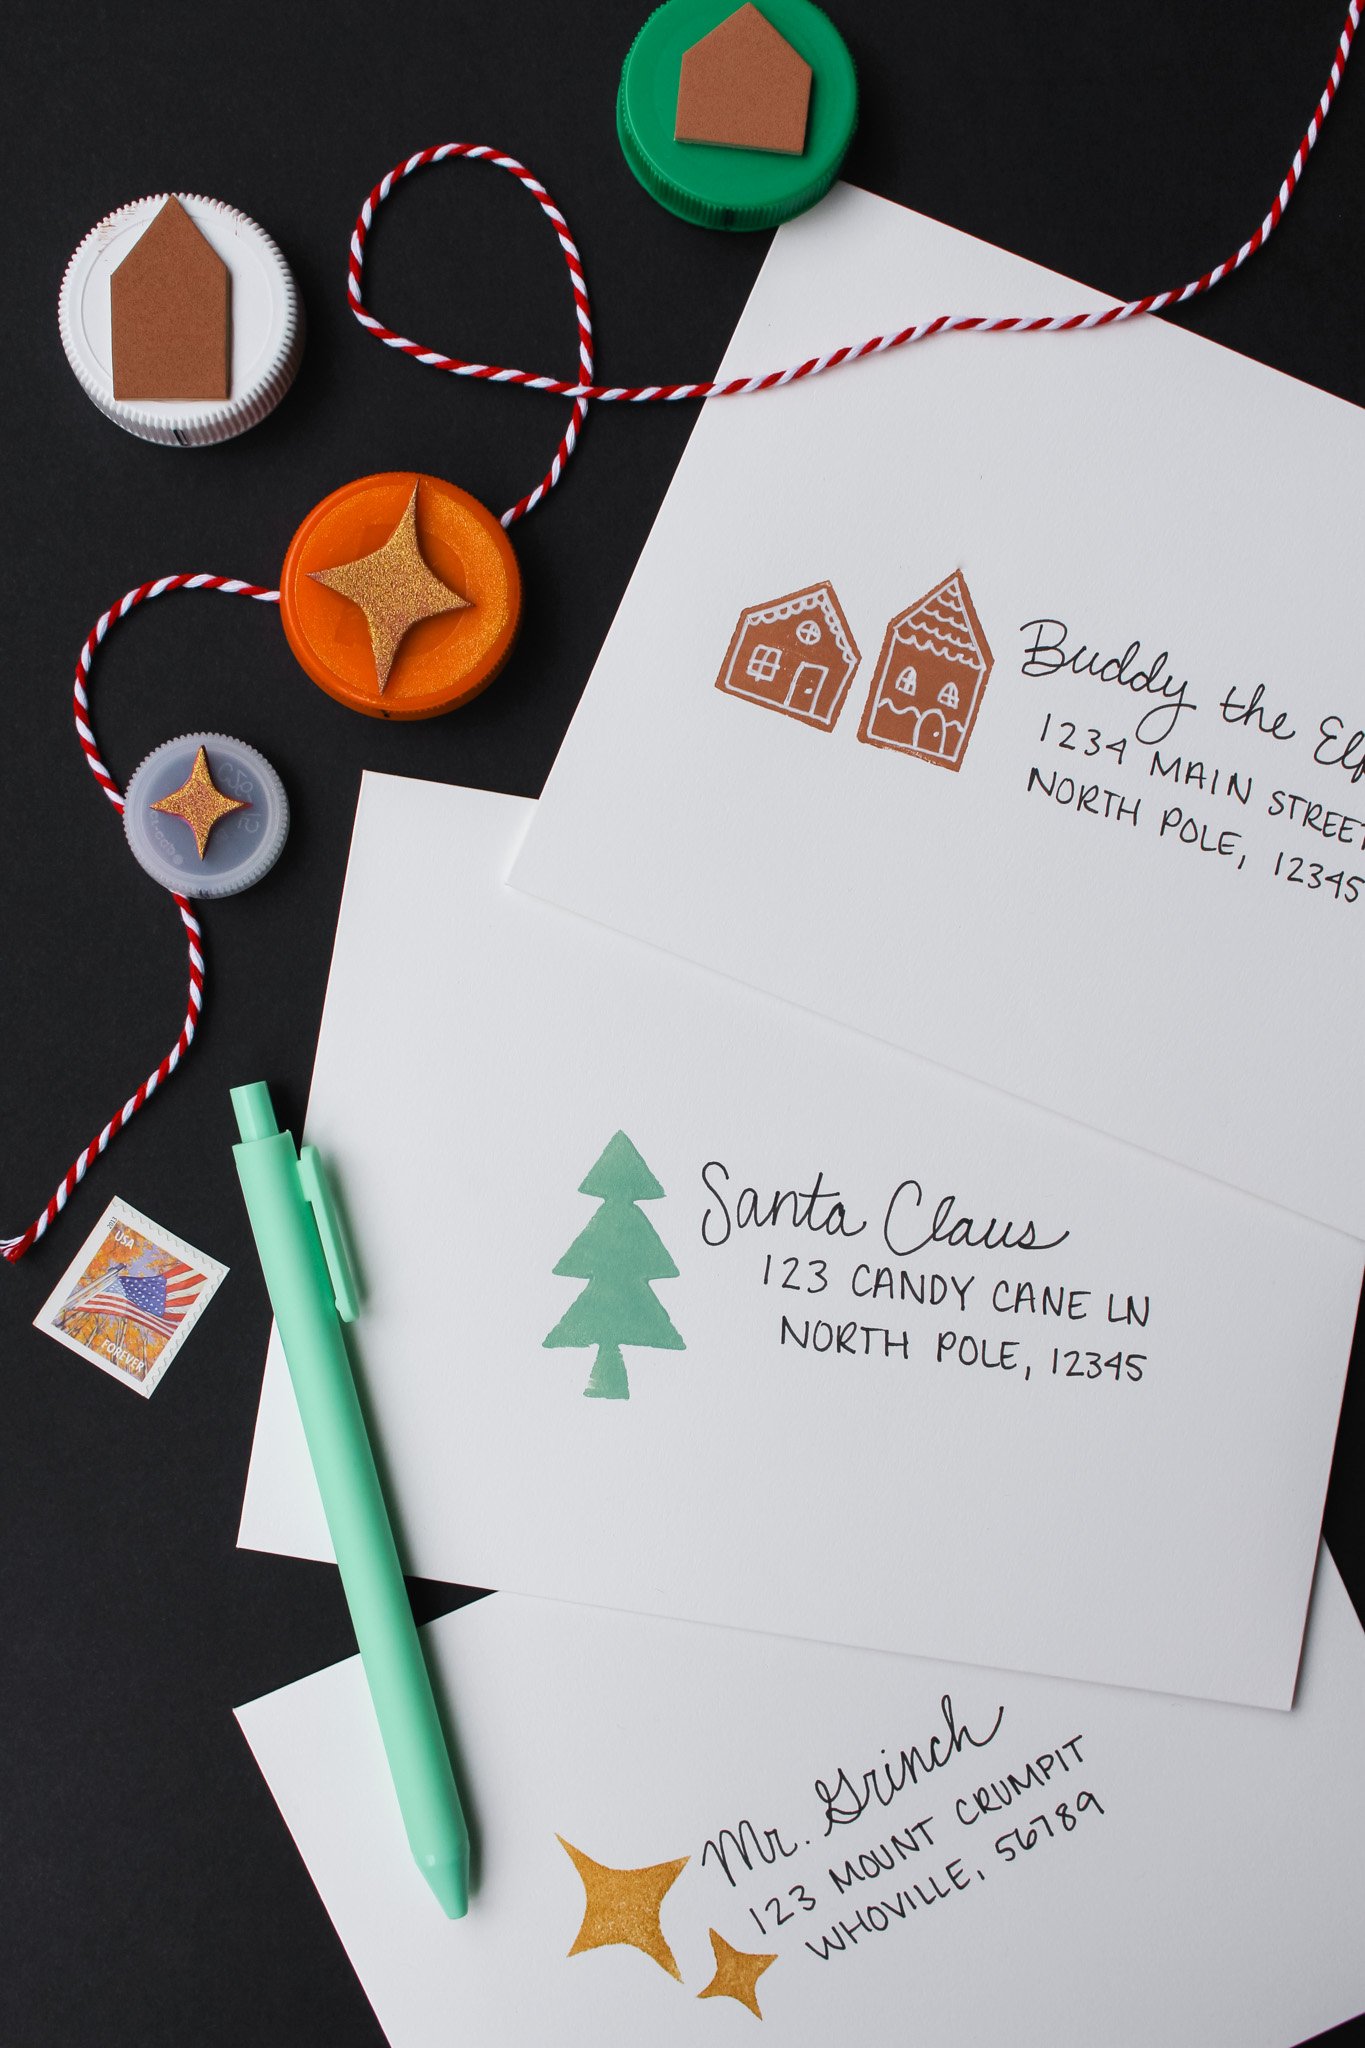 Christmas Vibes - Crafting Paper Package